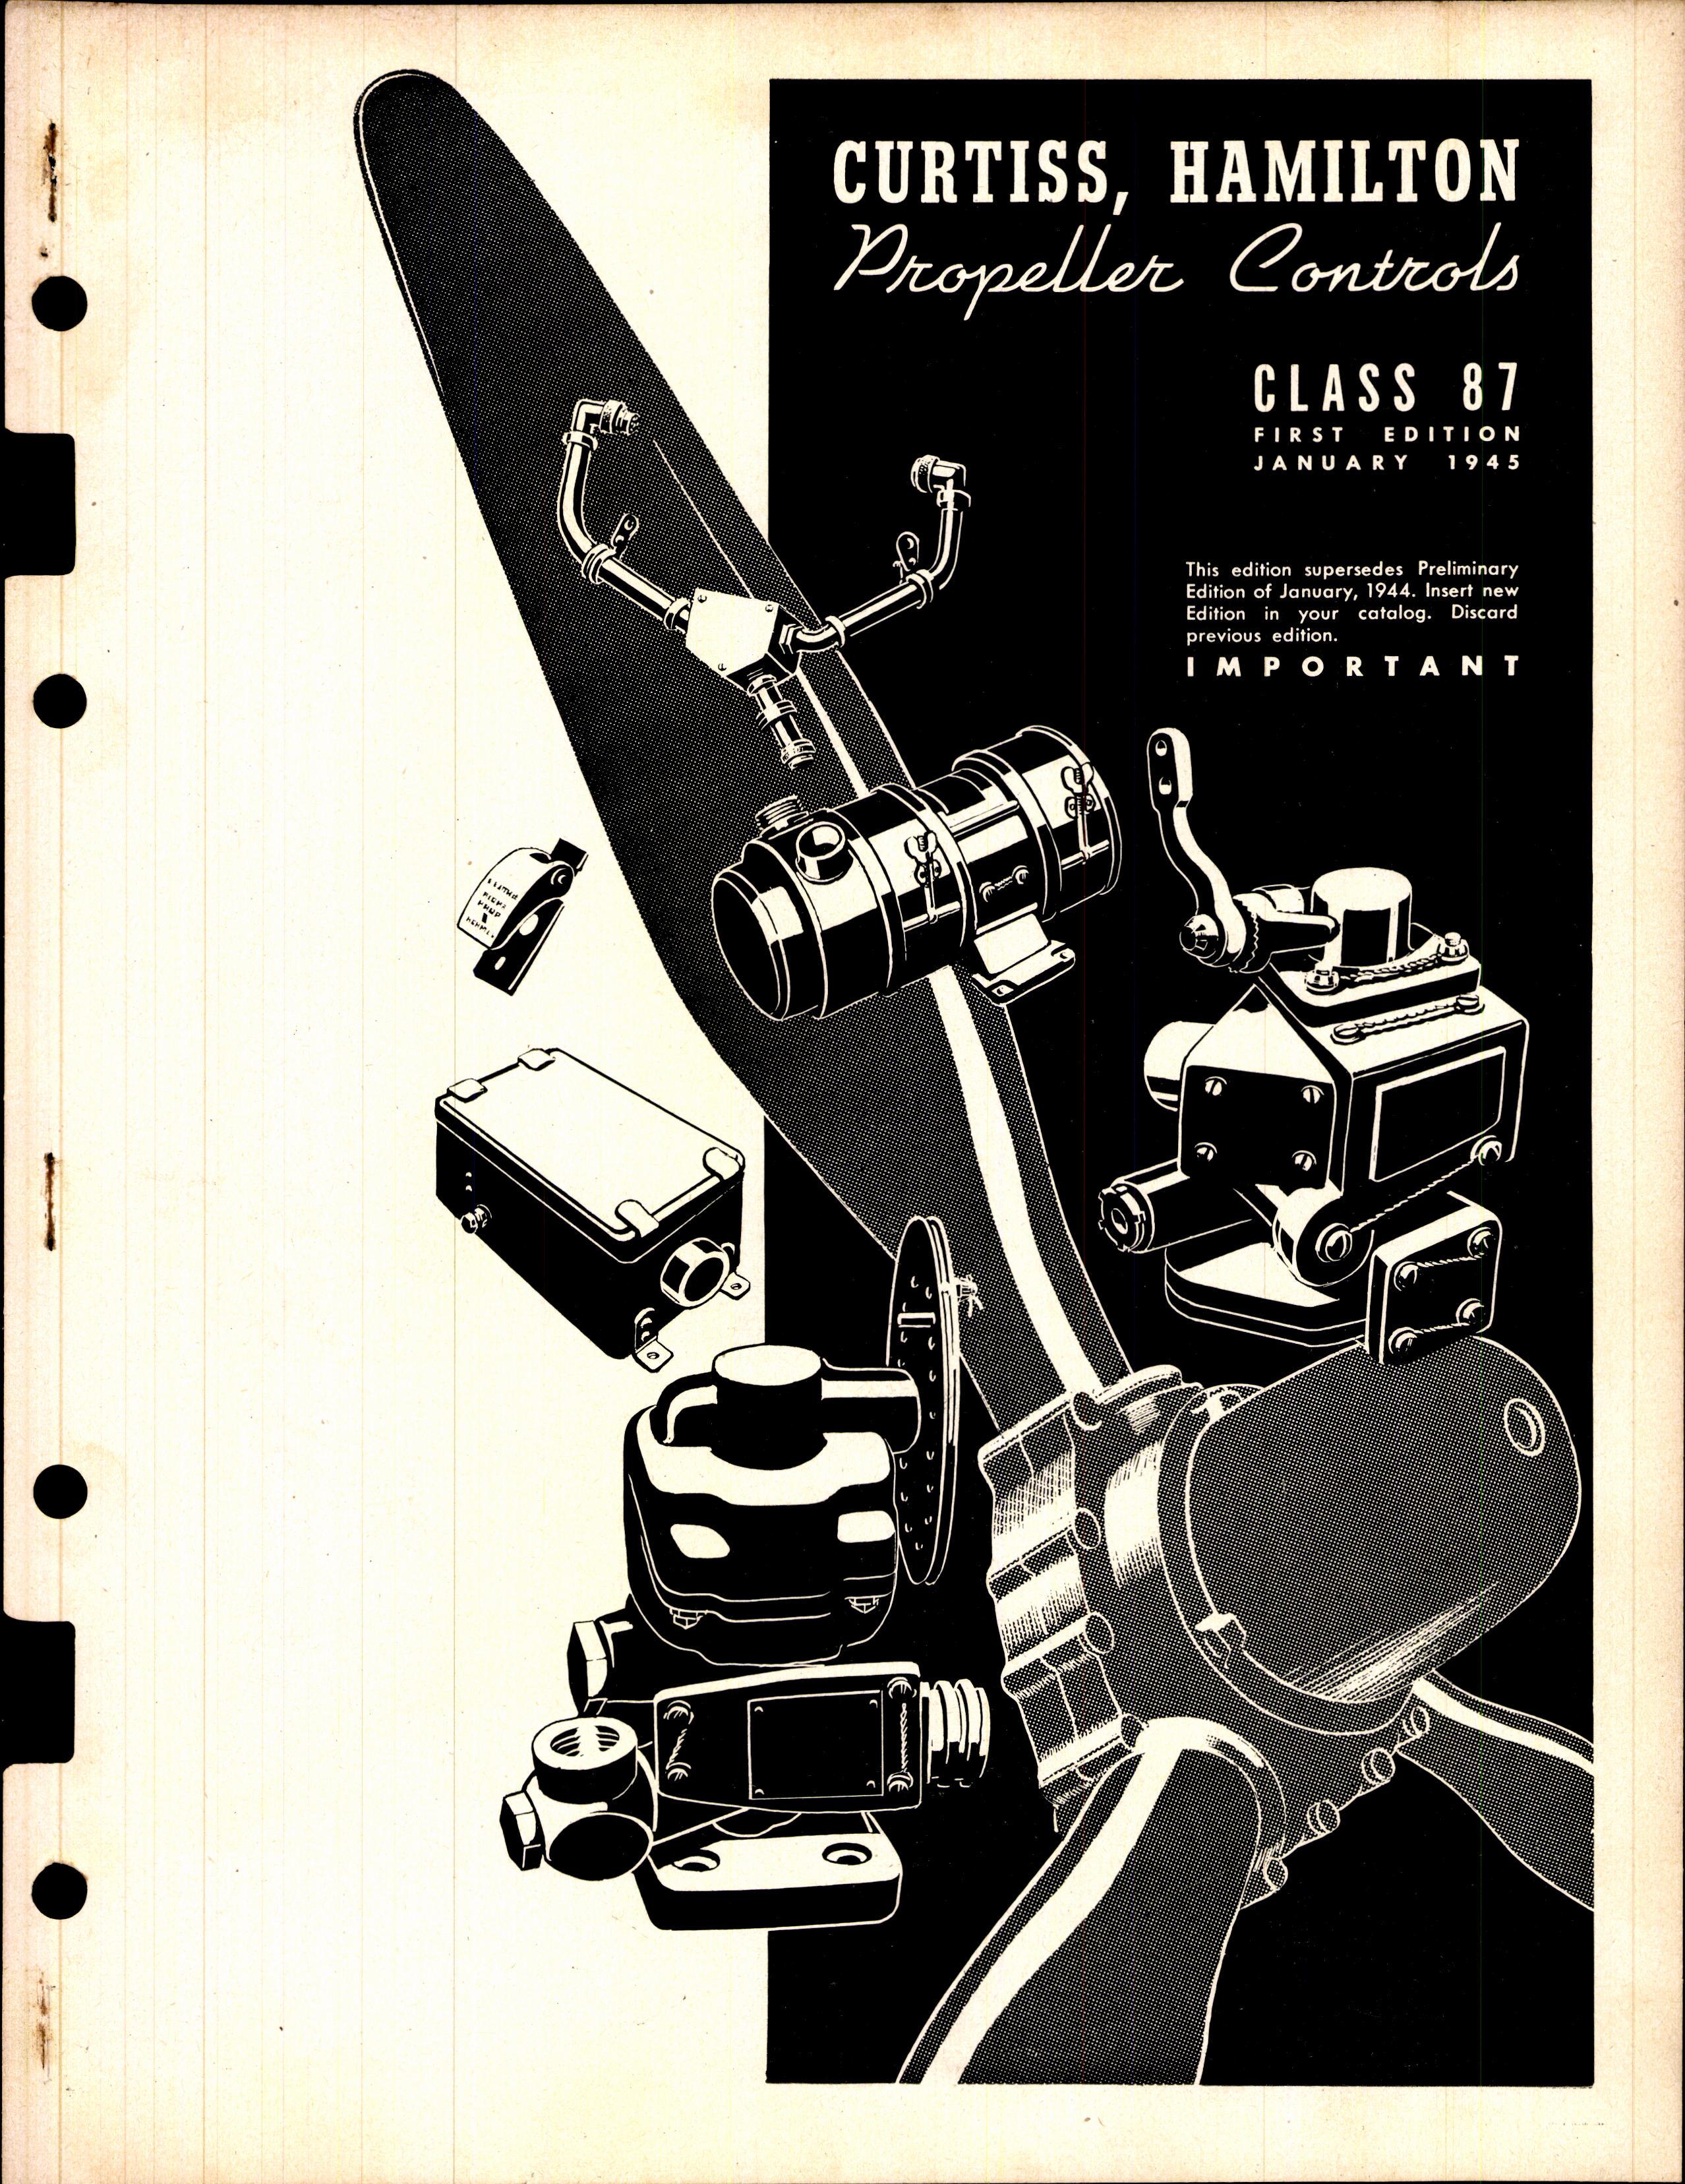 Sample page 1 from AirCorps Library document: Curtiss, Hamilton Propeller Controls